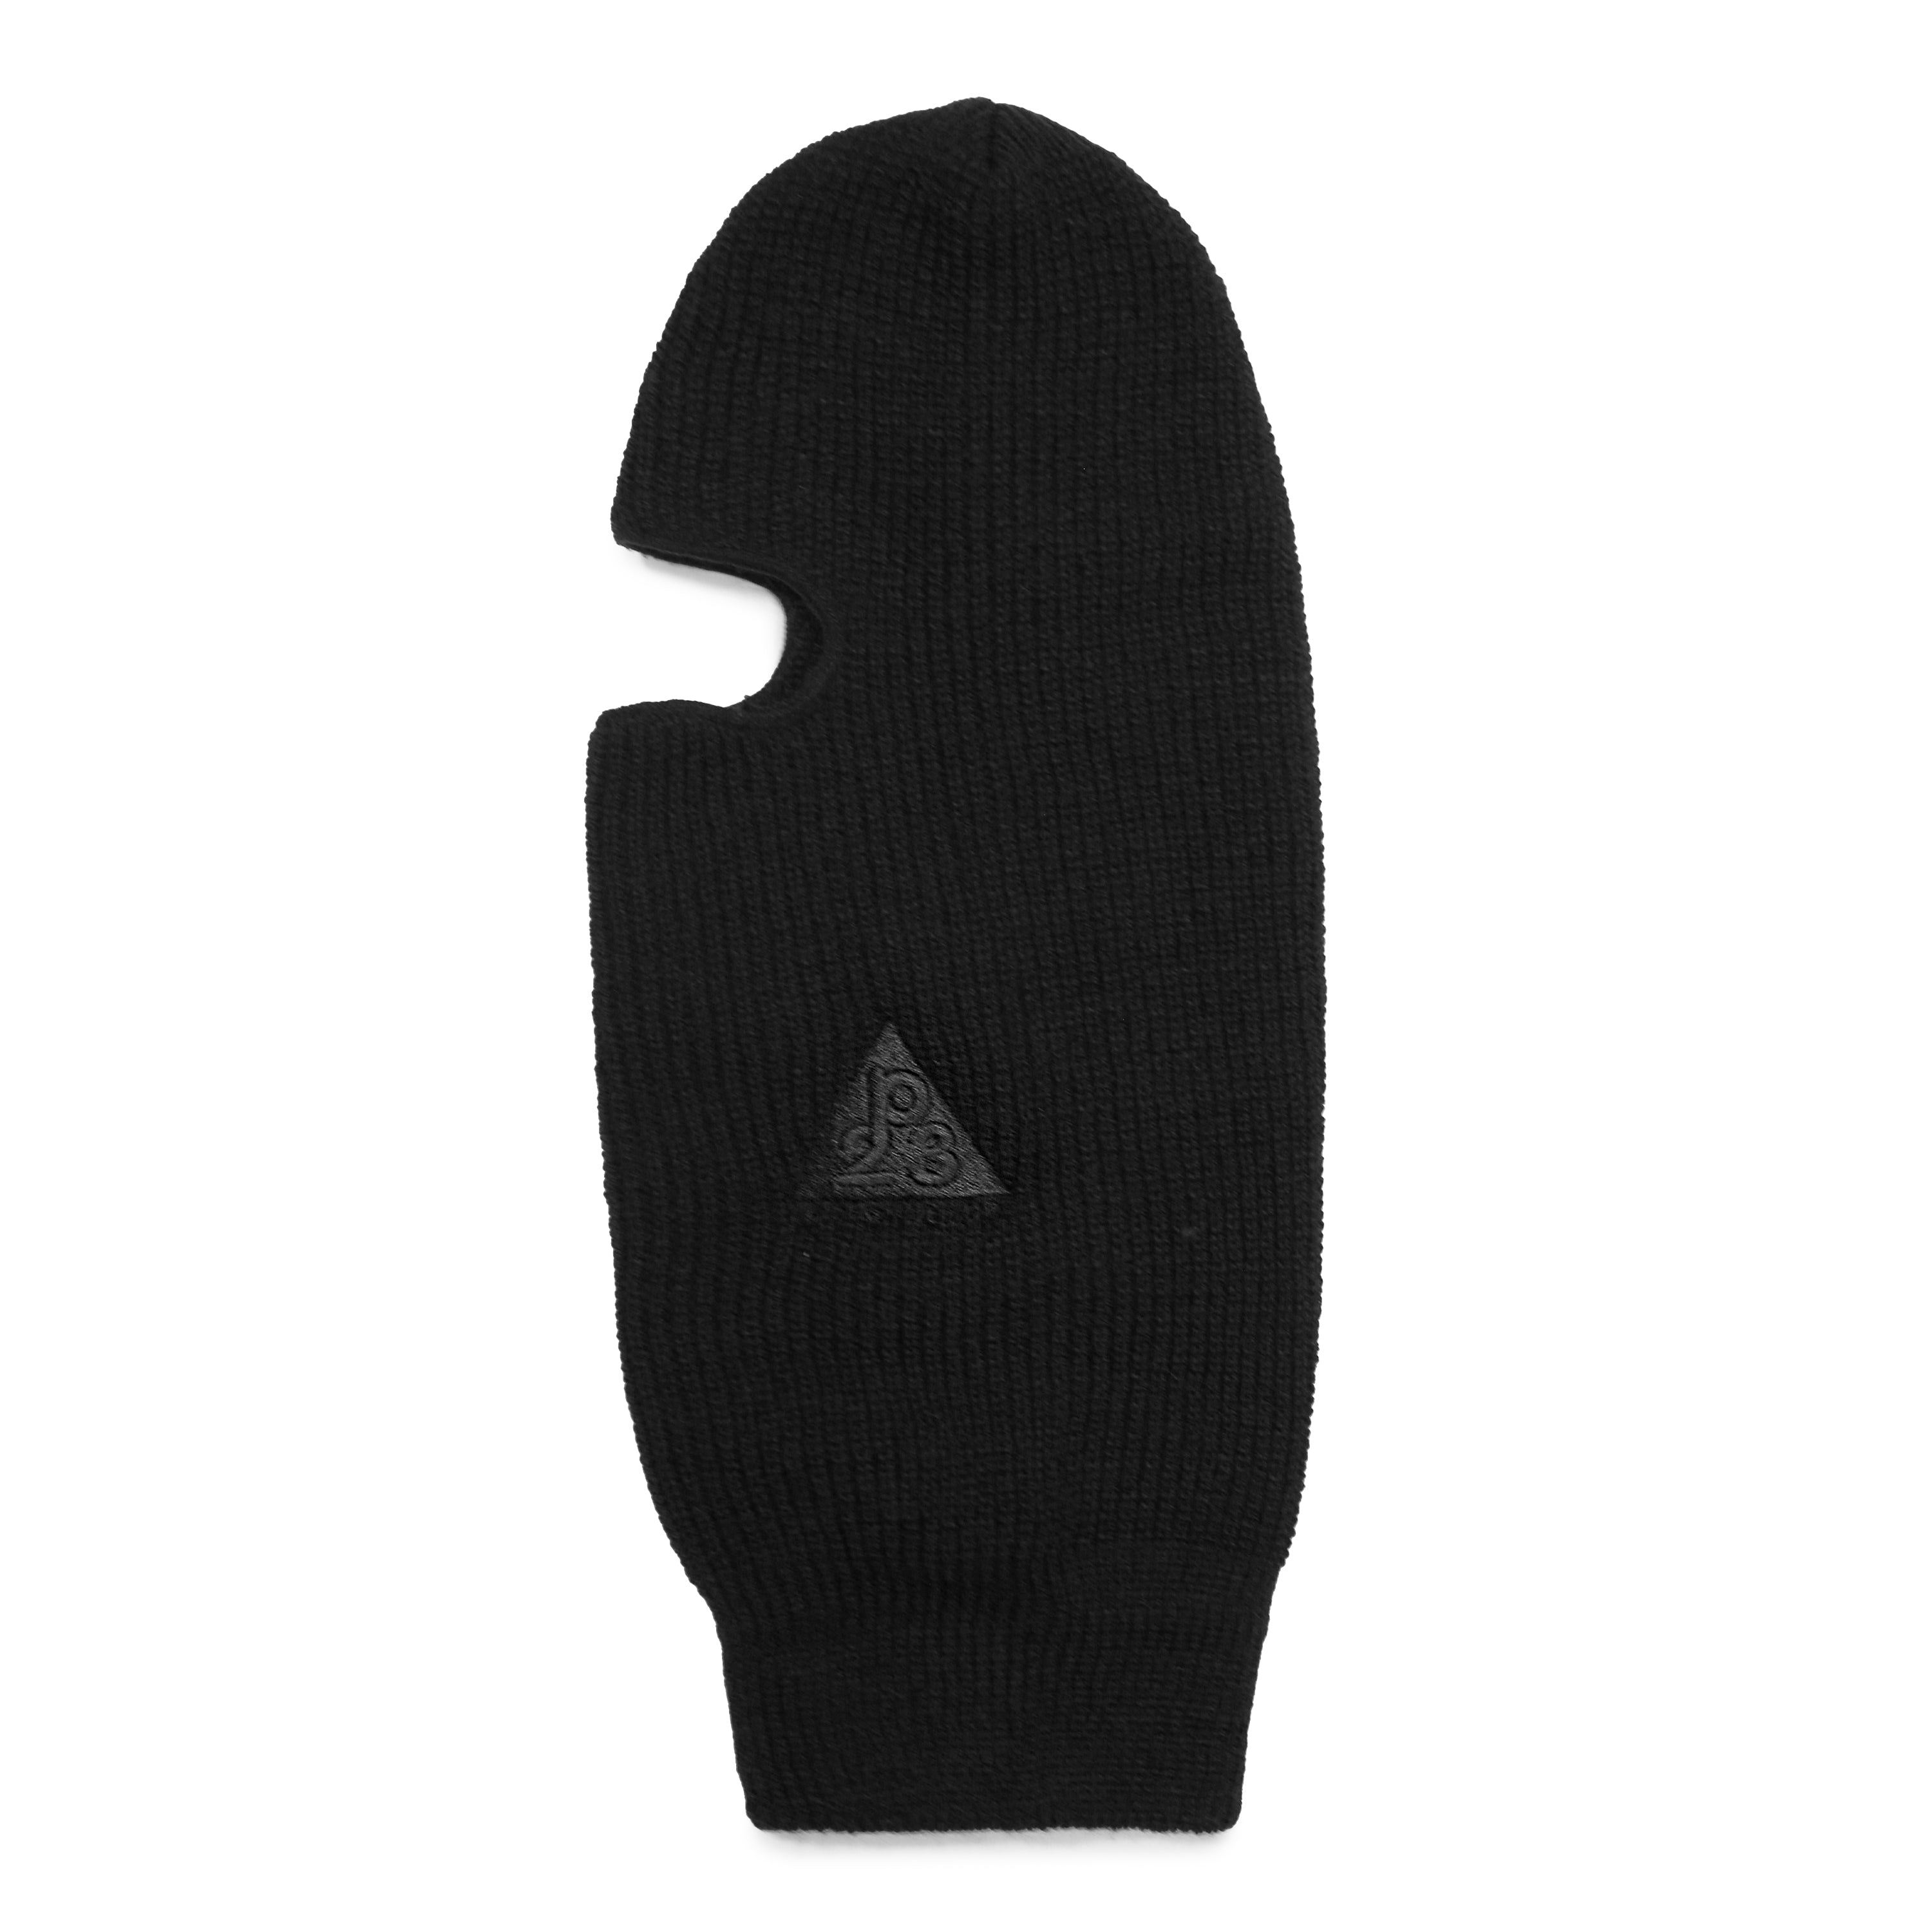 Parlor 23 "All Conditions Gear" 1-Hole Ski Mask